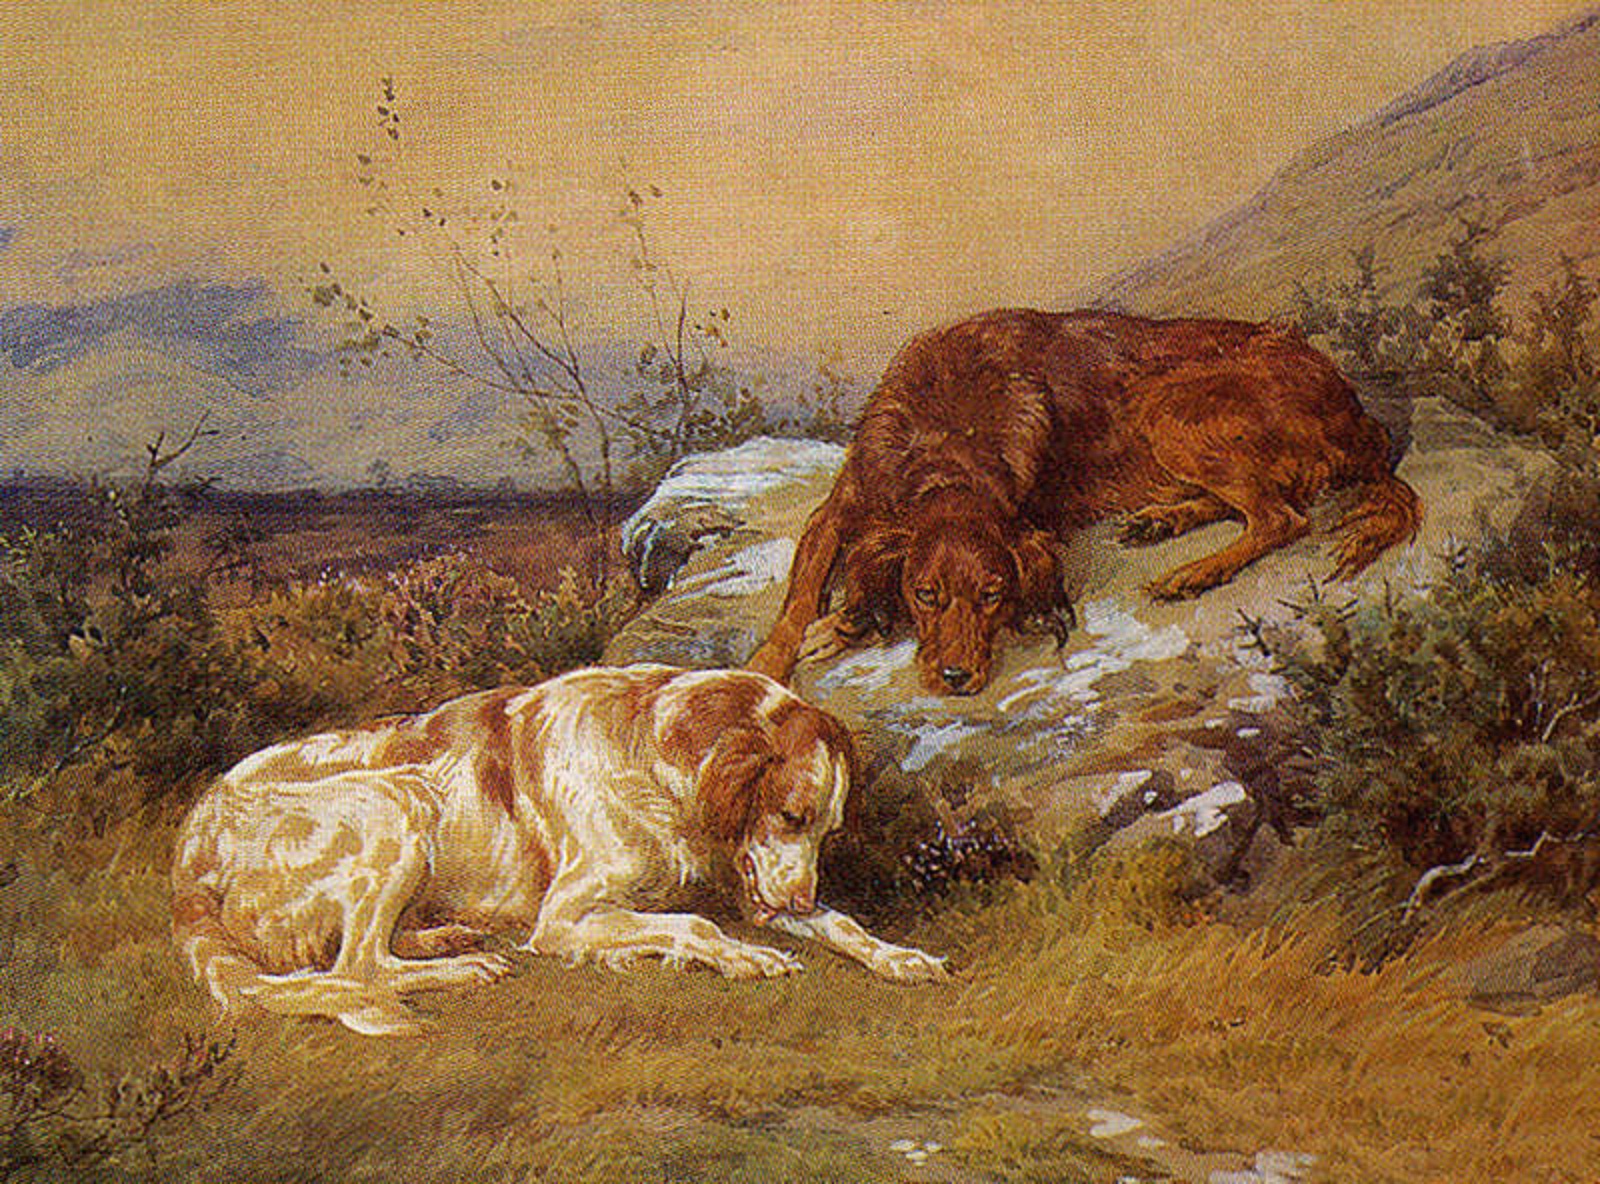 Drawn Irish Red and White Setter dogs wallpaper